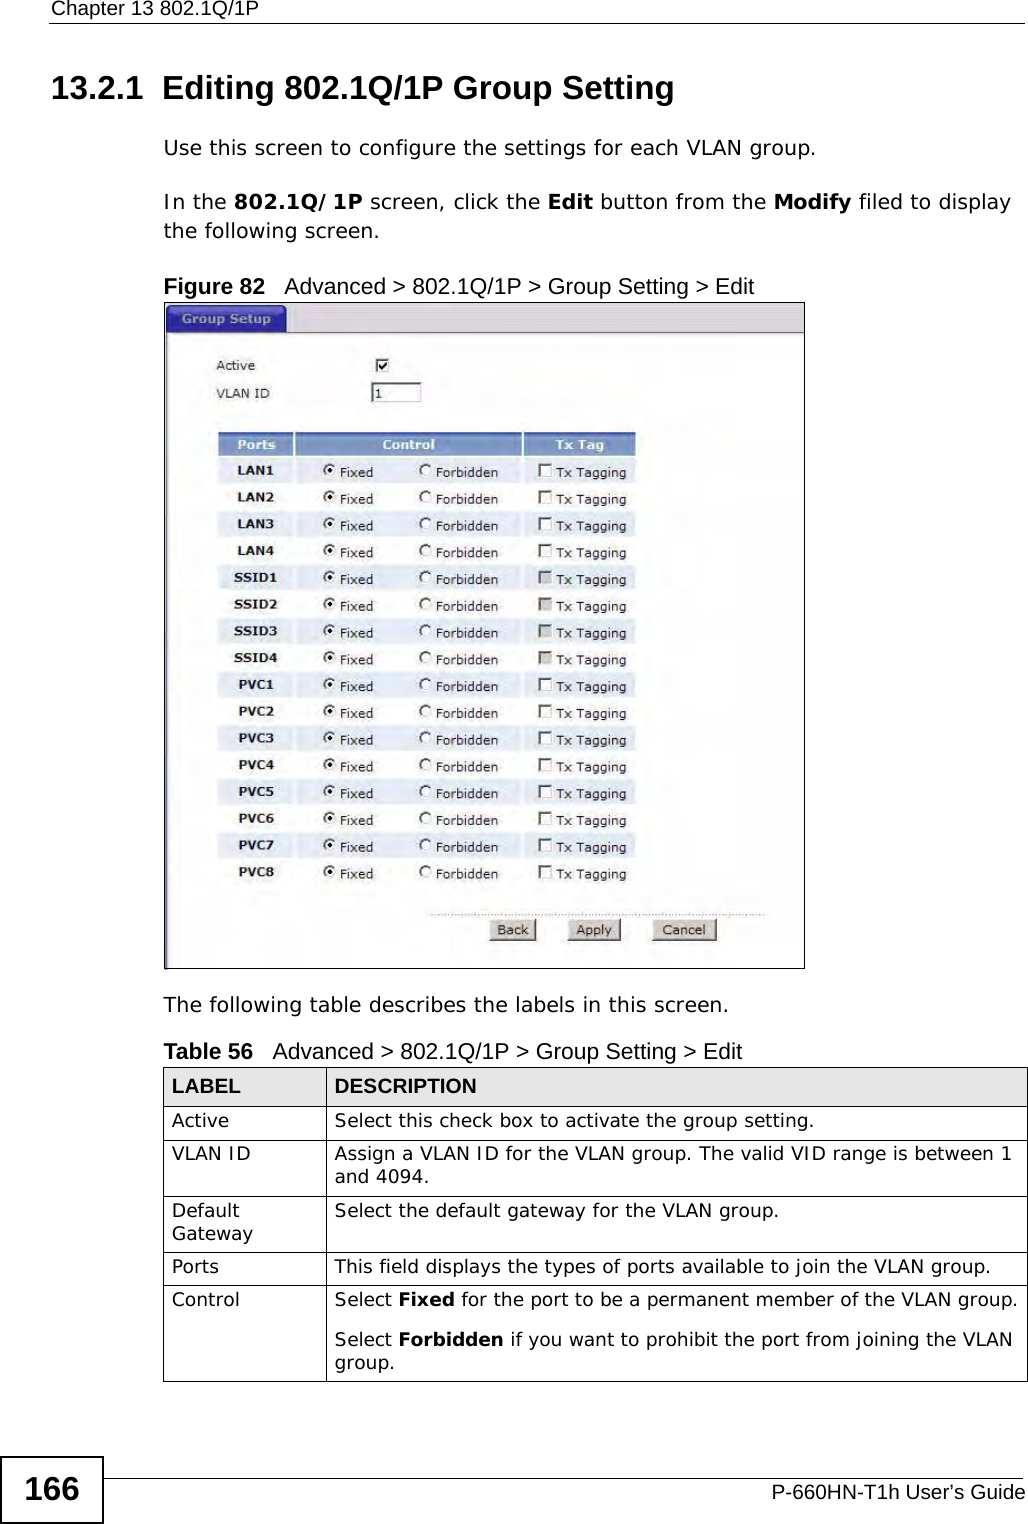 Chapter 13 802.1Q/1PP-660HN-T1h User’s Guide16613.2.1  Editing 802.1Q/1P Group SettingUse this screen to configure the settings for each VLAN group.In the 802.1Q/1P screen, click the Edit button from the Modify filed to display the following screen.Figure 82   Advanced &gt; 802.1Q/1P &gt; Group Setting &gt; EditThe following table describes the labels in this screen.  Table 56   Advanced &gt; 802.1Q/1P &gt; Group Setting &gt; EditLABEL DESCRIPTIONActive Select this check box to activate the group setting.VLAN ID Assign a VLAN ID for the VLAN group. The valid VID range is between 1 and 4094.Default Gateway Select the default gateway for the VLAN group.Ports This field displays the types of ports available to join the VLAN group.Control Select Fixed for the port to be a permanent member of the VLAN group.Select Forbidden if you want to prohibit the port from joining the VLAN group.